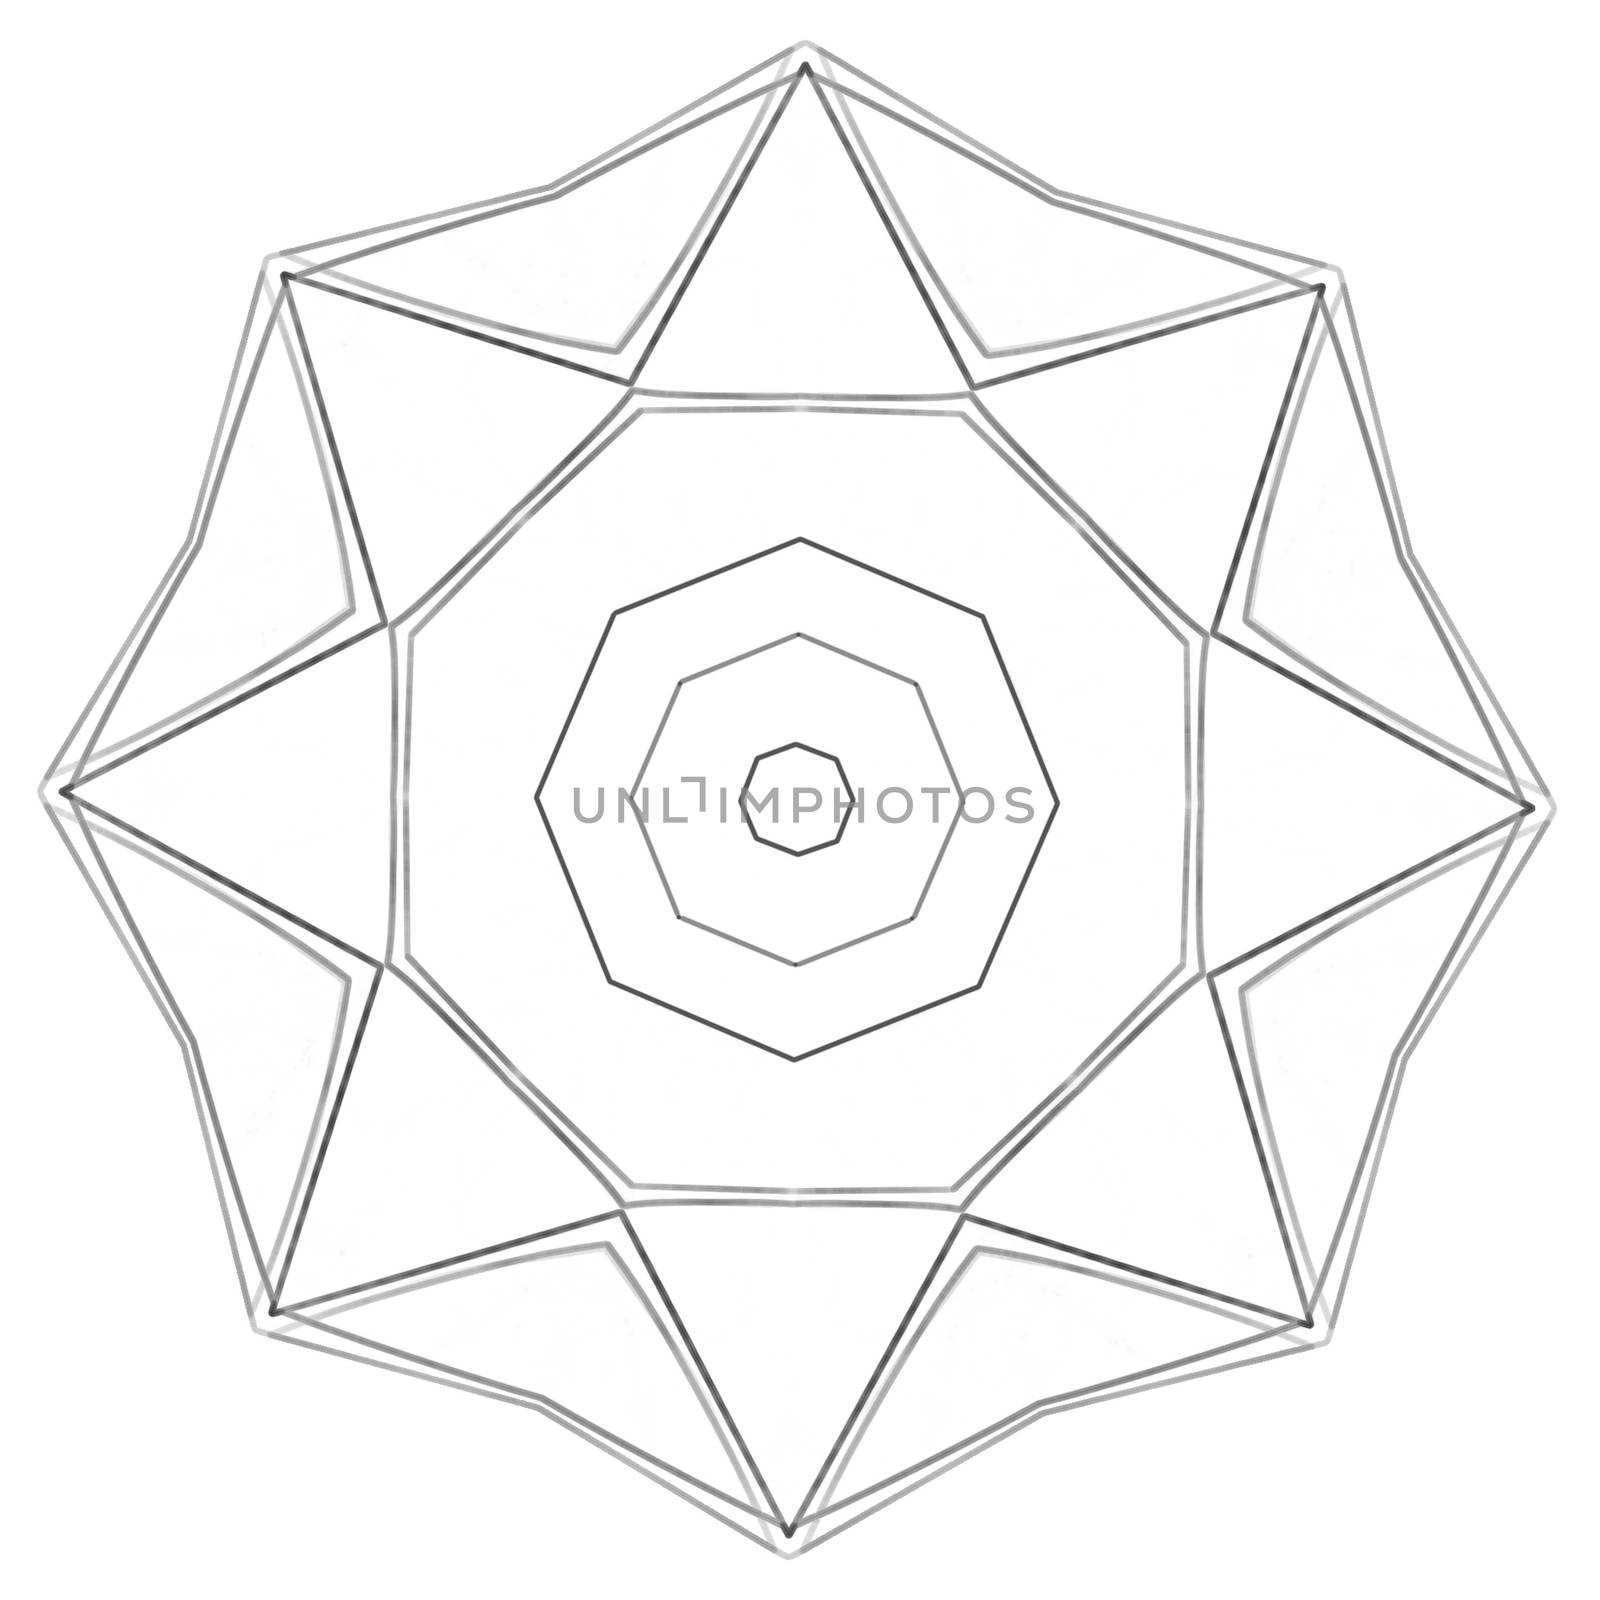 Illustration: Coloring Book Series: Octagon. Soft thin line. Print it and bring it to Life with Color! Fantastic Outline / Sketch / Line Art Design. by NextMars